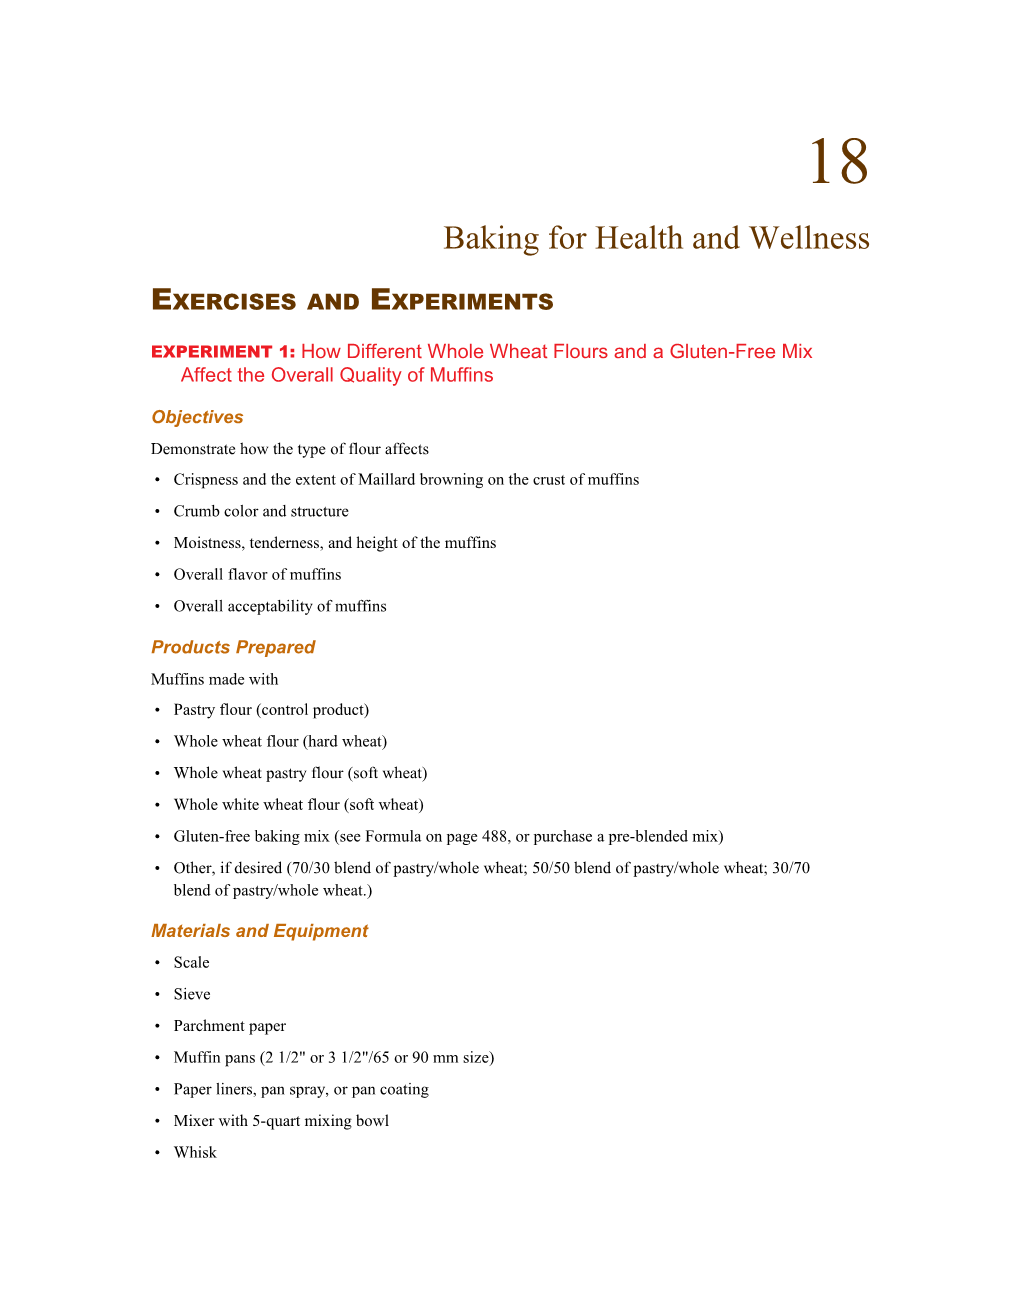 Baking for Health and Wellness